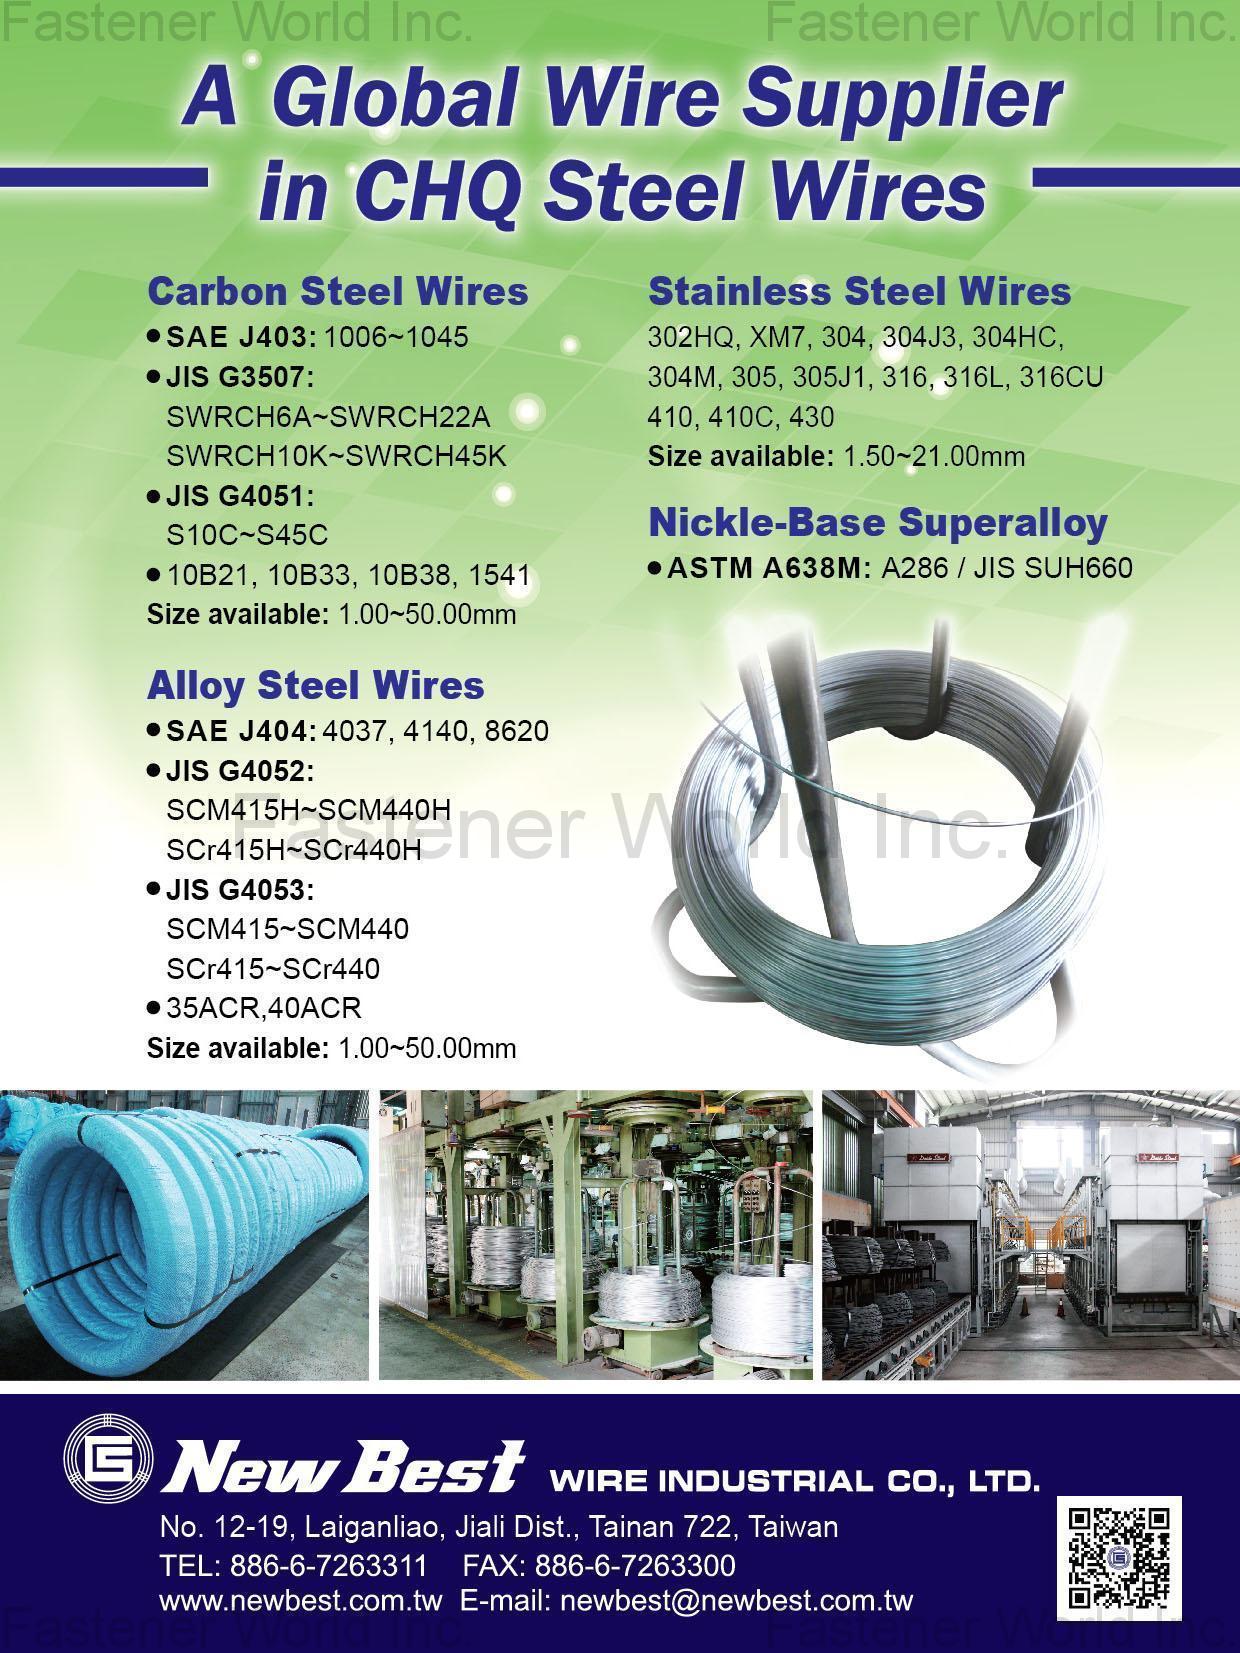 NEW BEST WIRE INDUSTRIAL CO., LTD.  , Carbon Steel Wire, Alloy Steel Wire, Stainless Steel Wire, Nickle-Base Superally , Alloy Steel Wire & Rod